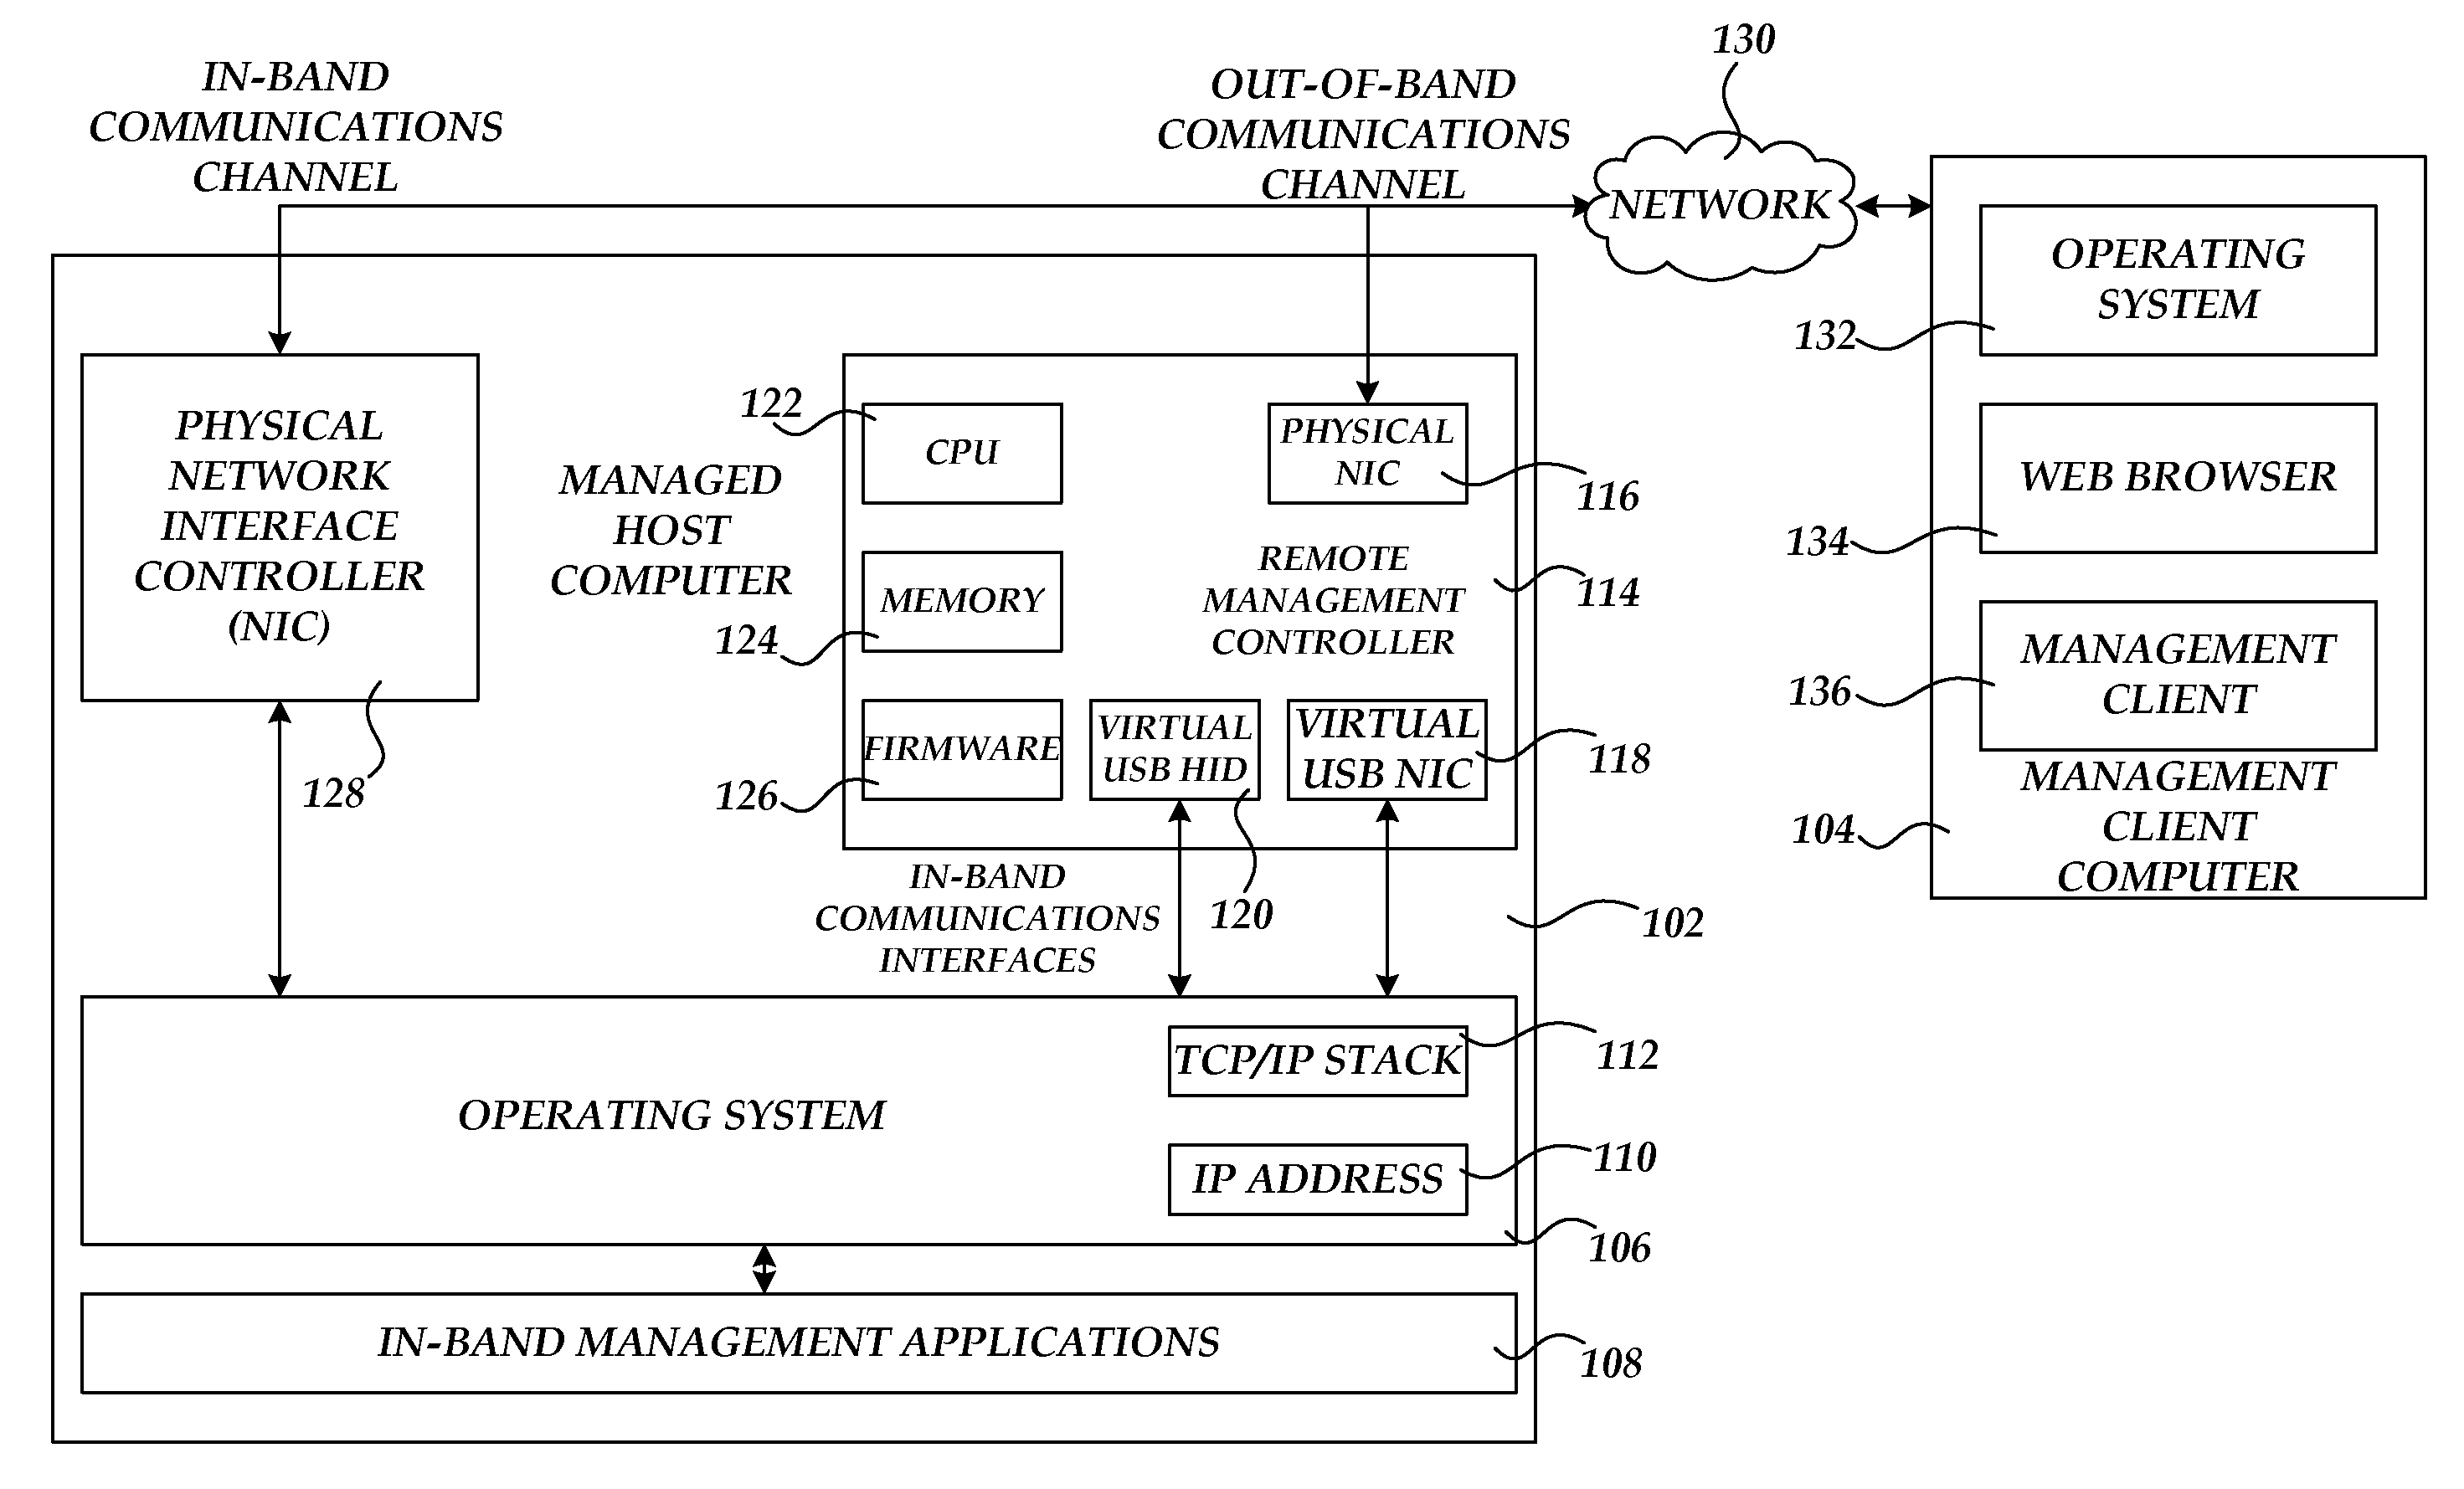 Communicating with an in-band management application through an out-of-band communications channel